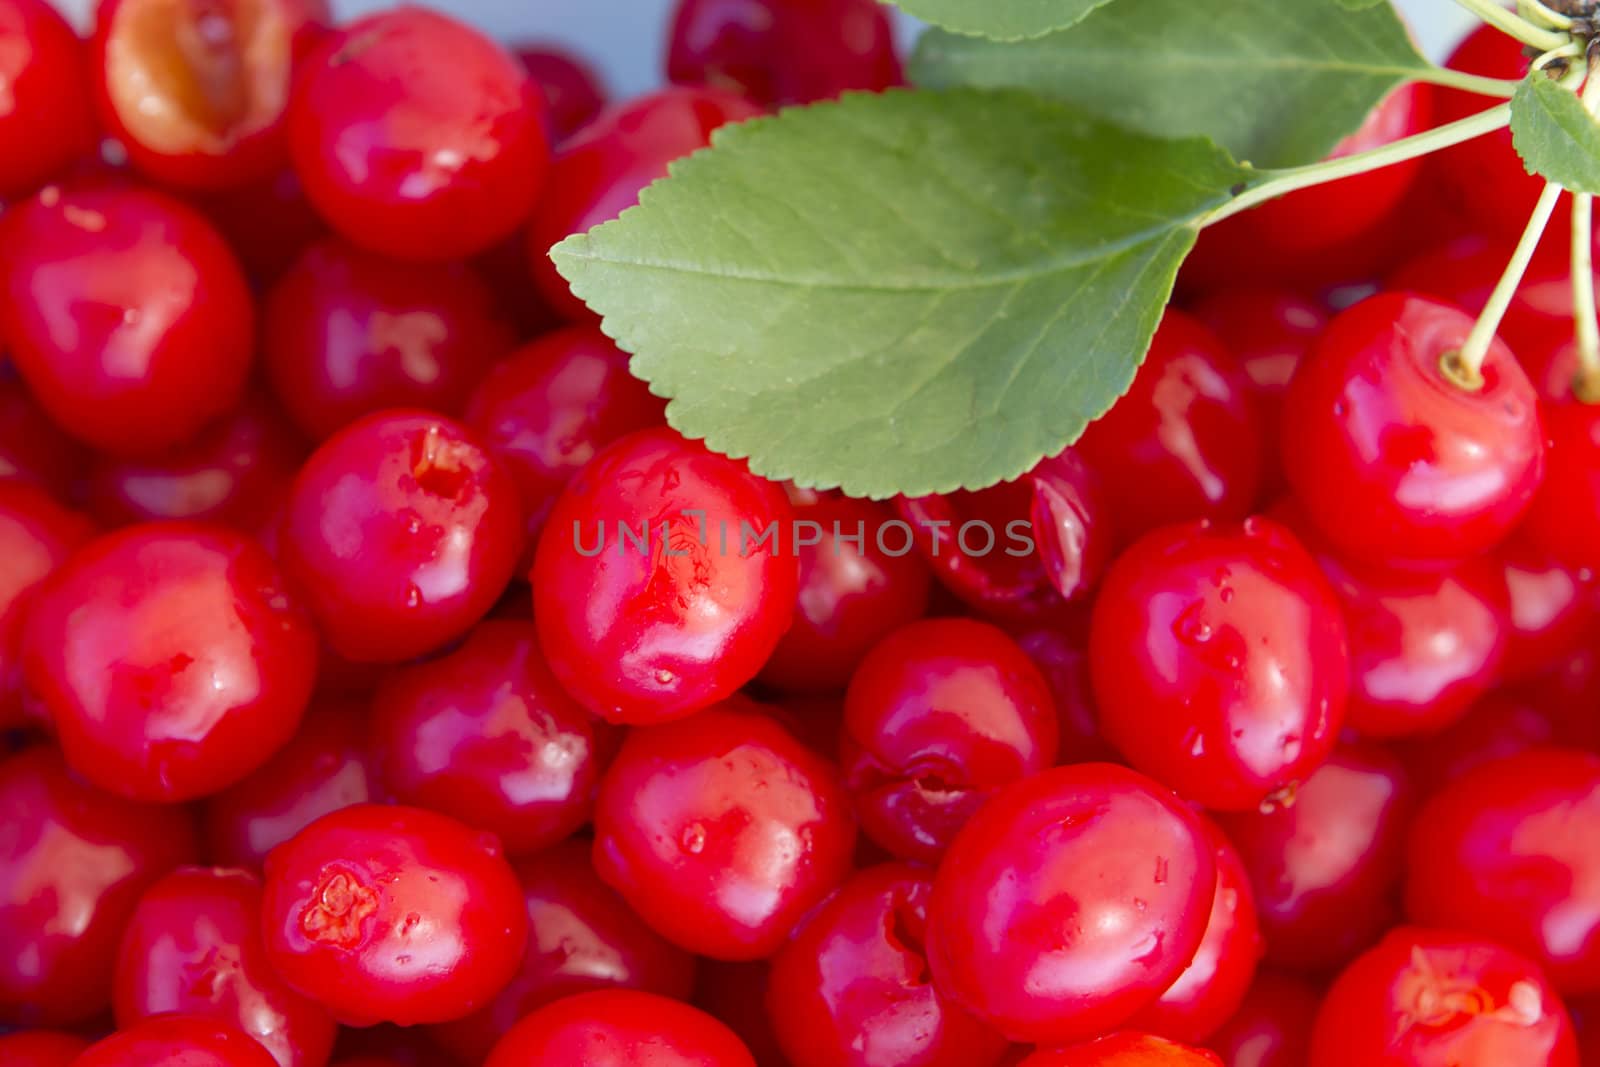 Pitted Sour Cherries by coskun